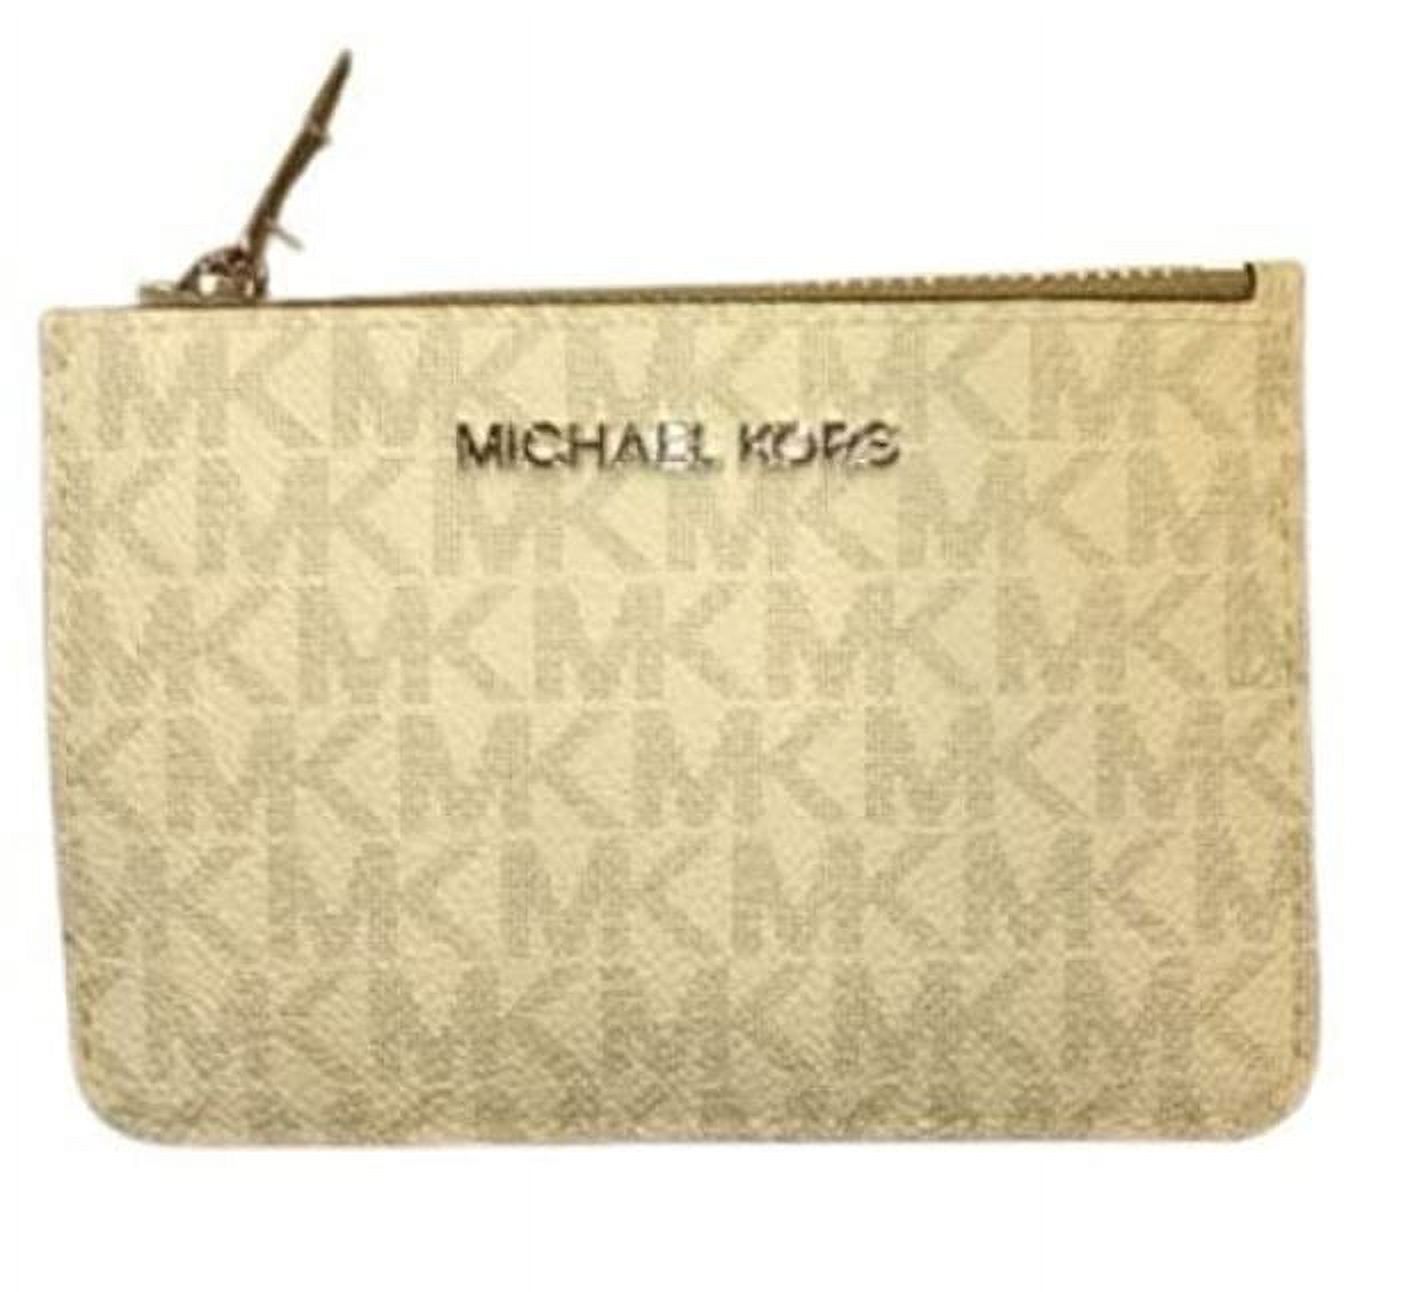 Michael Kors Womens Jet Set Travel Small Top Zip Coin Pouch (Bright White) MK Signature - image 1 of 3